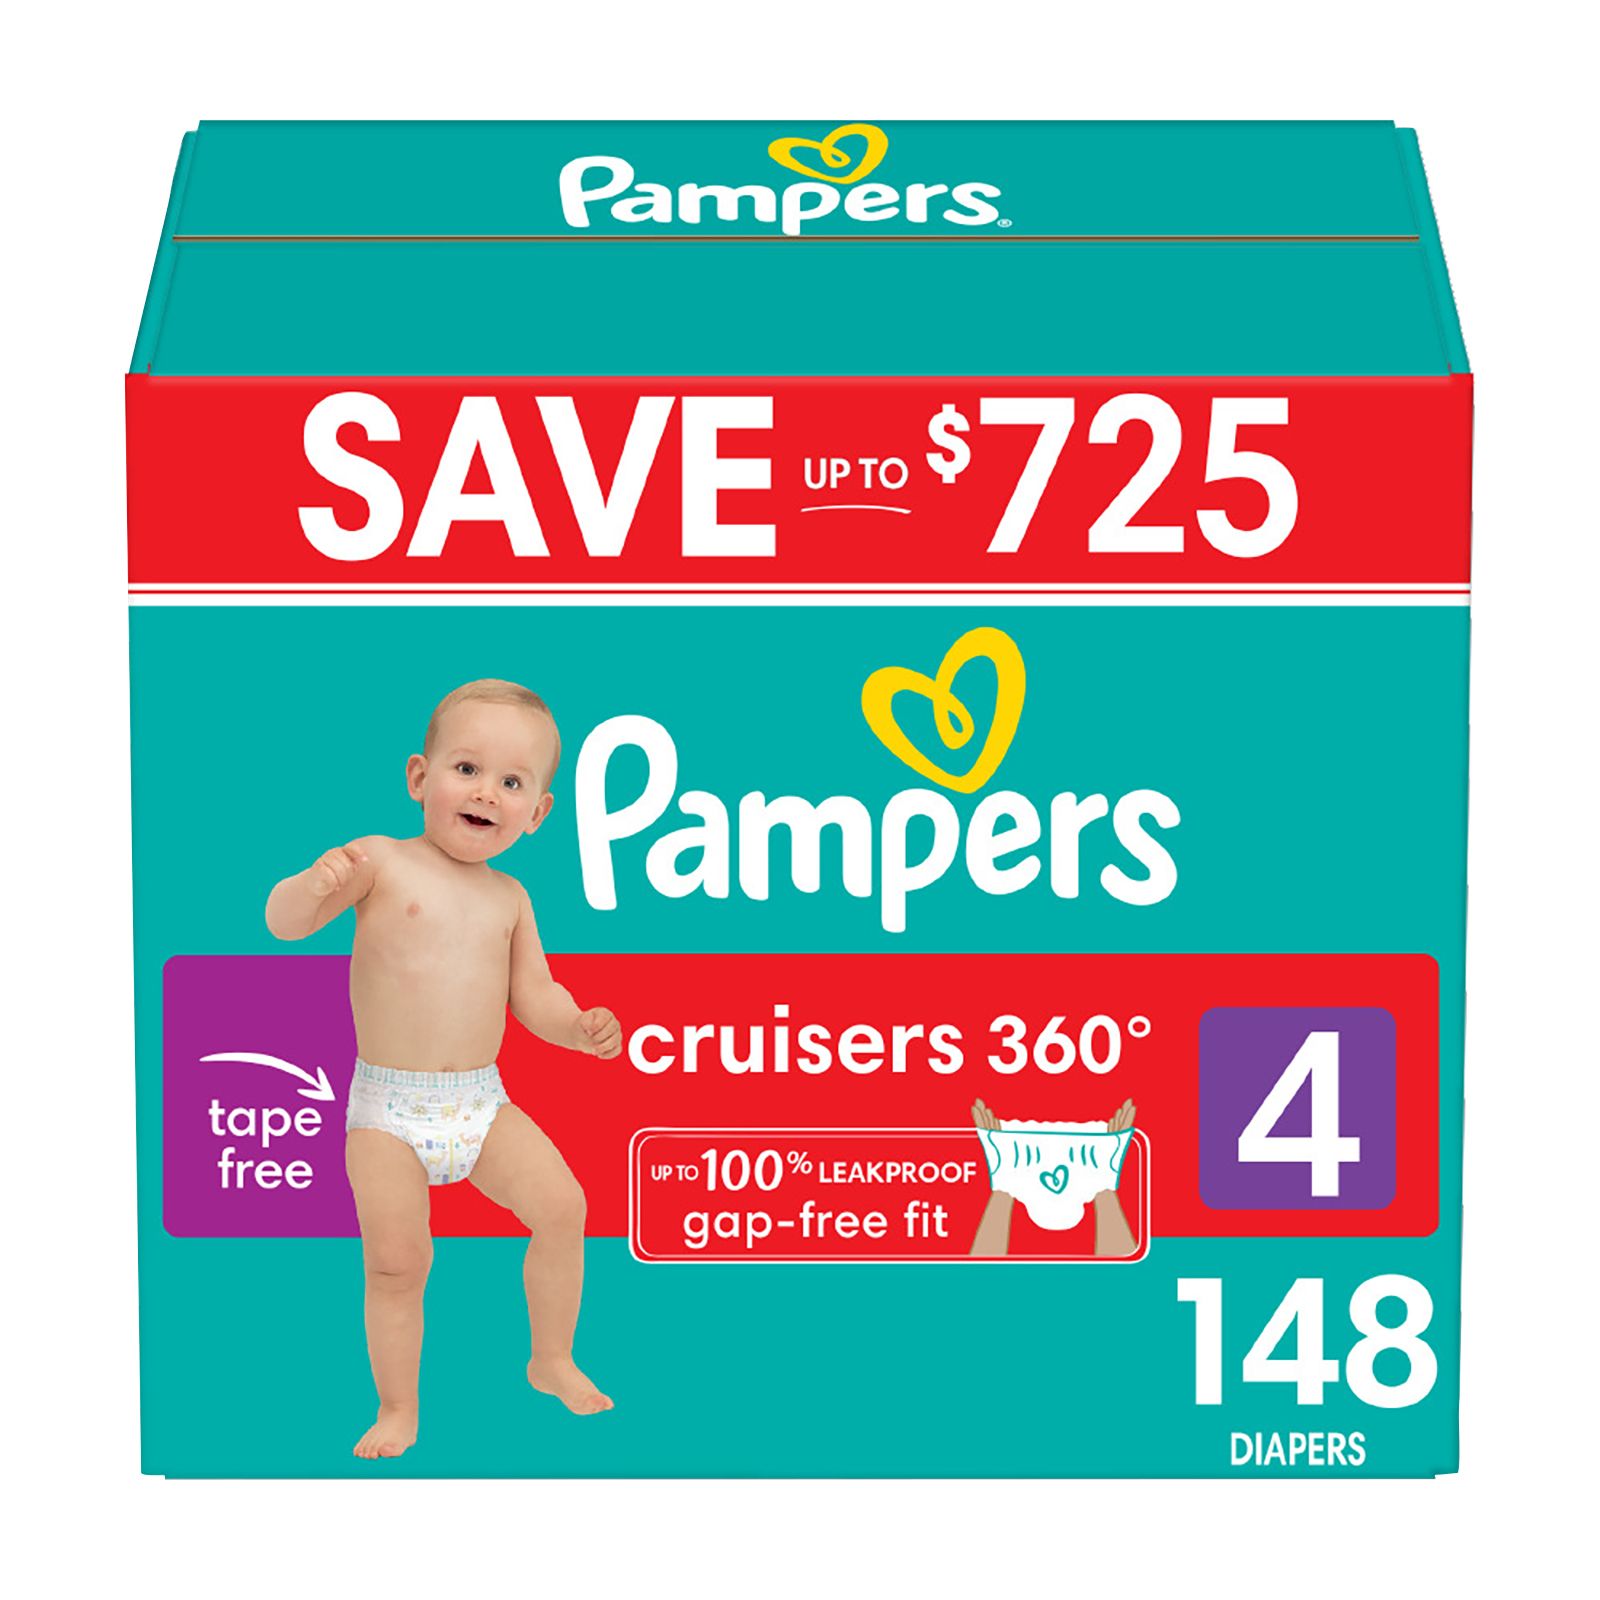 Wholesale Pampers Diapers - Buy in Bulk at discounted prices